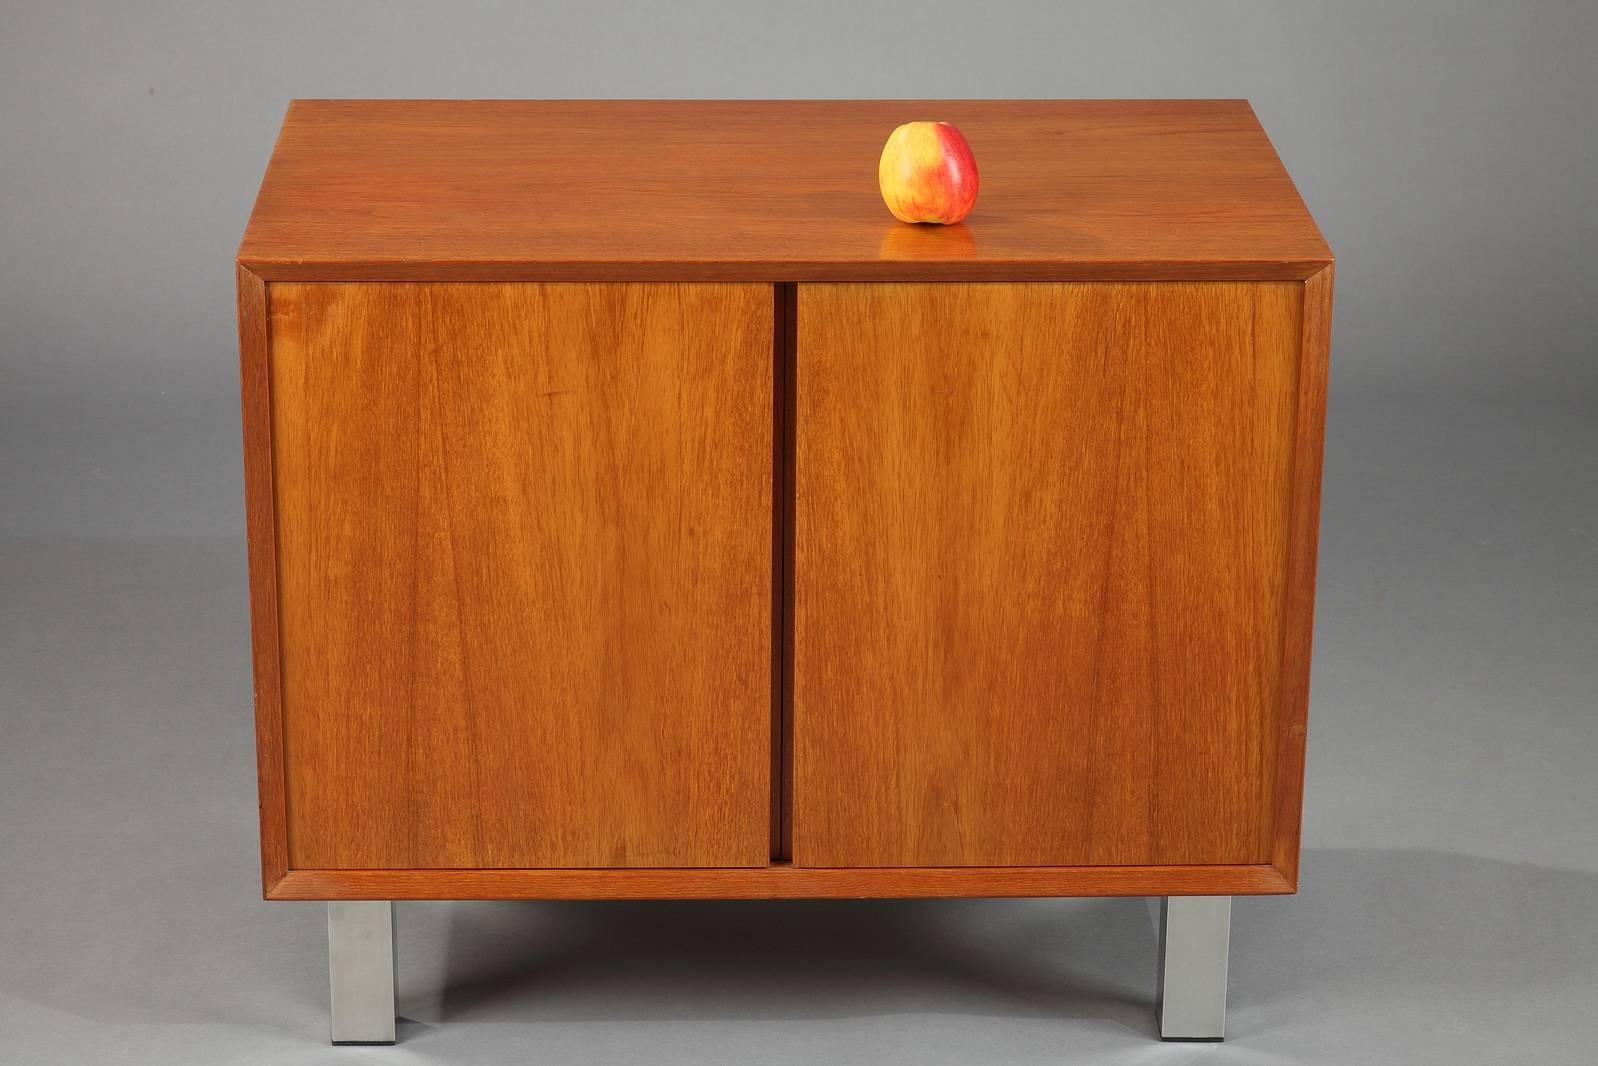 Cabinet in teak veneer from the 1960s. The two doors open to display a storage compartment with one shelve. It rests on four aluminum feet. The pure and sober lines are typical of the Scandinavian Modern style. 

circa 1960
Dimension: W 31.5 in,